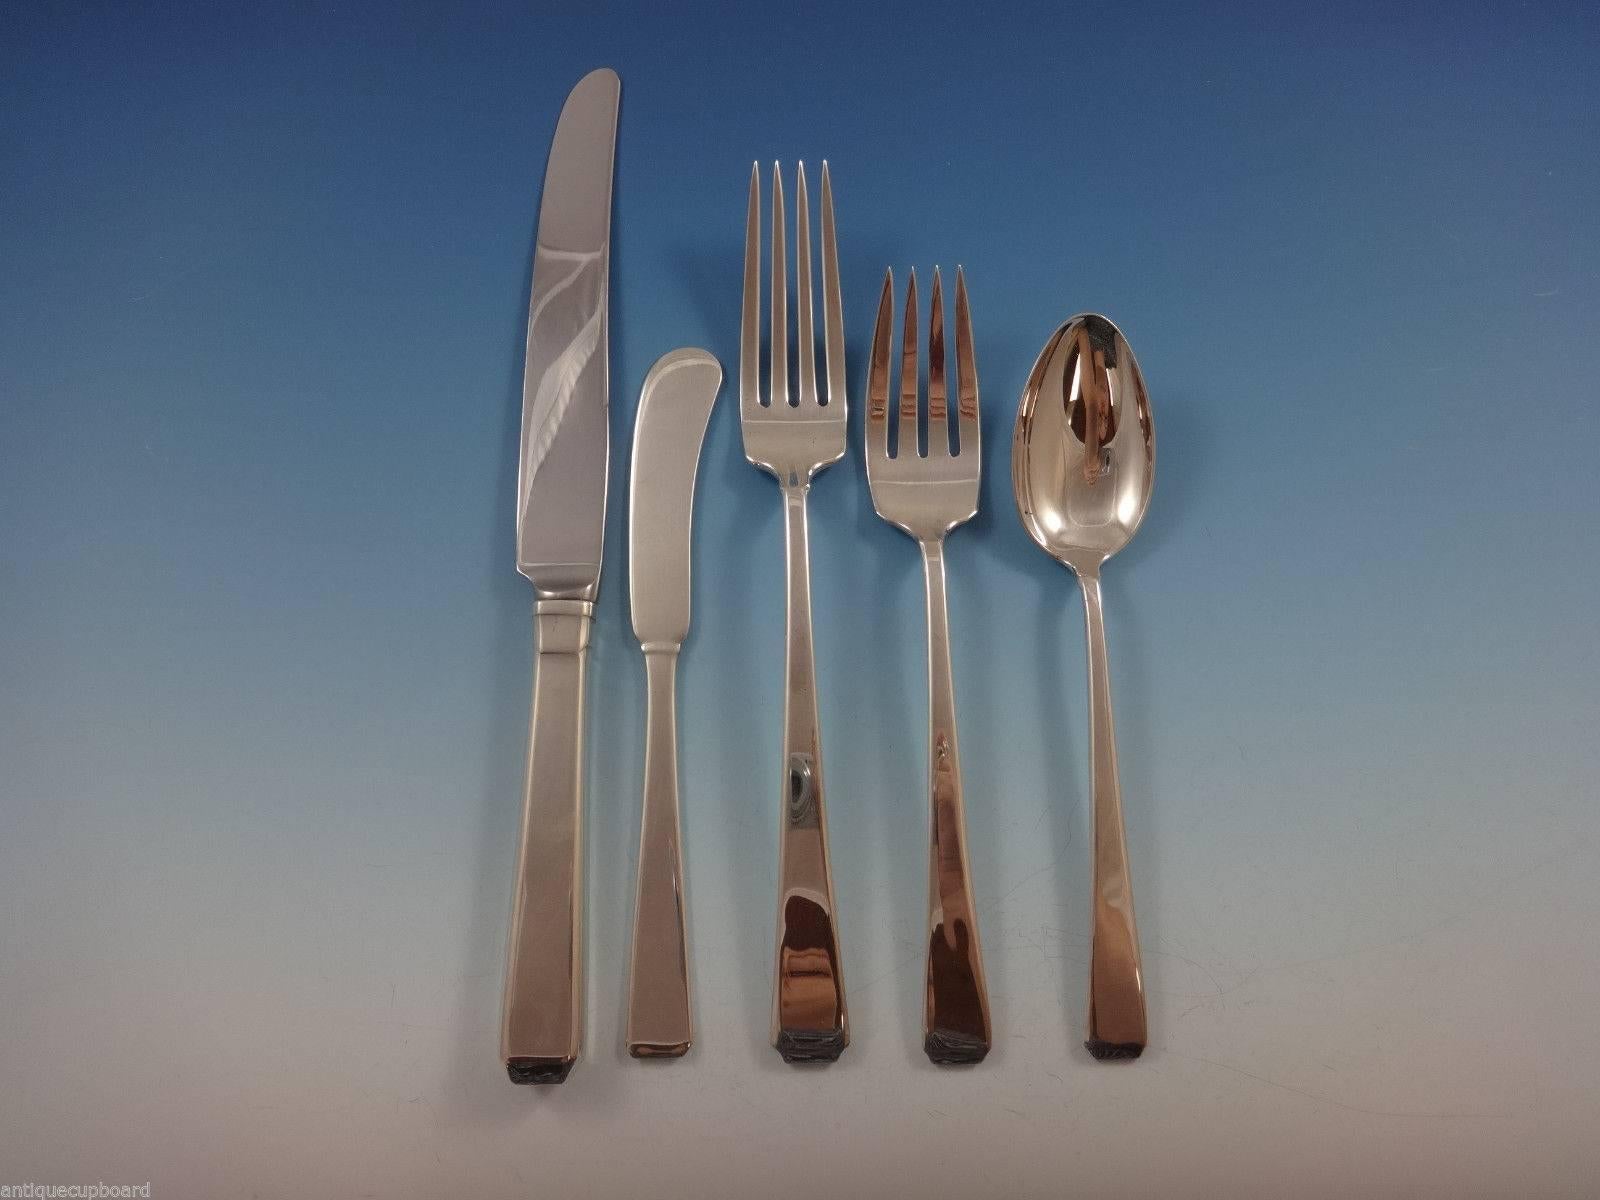 Stately in perfect proportion, this design is an elegant execution of form and function. Very unassuming in appearance yet every bit as formal as our other patterns, Craftsman’s unadorned surface displays the magnificence of high quality sterling